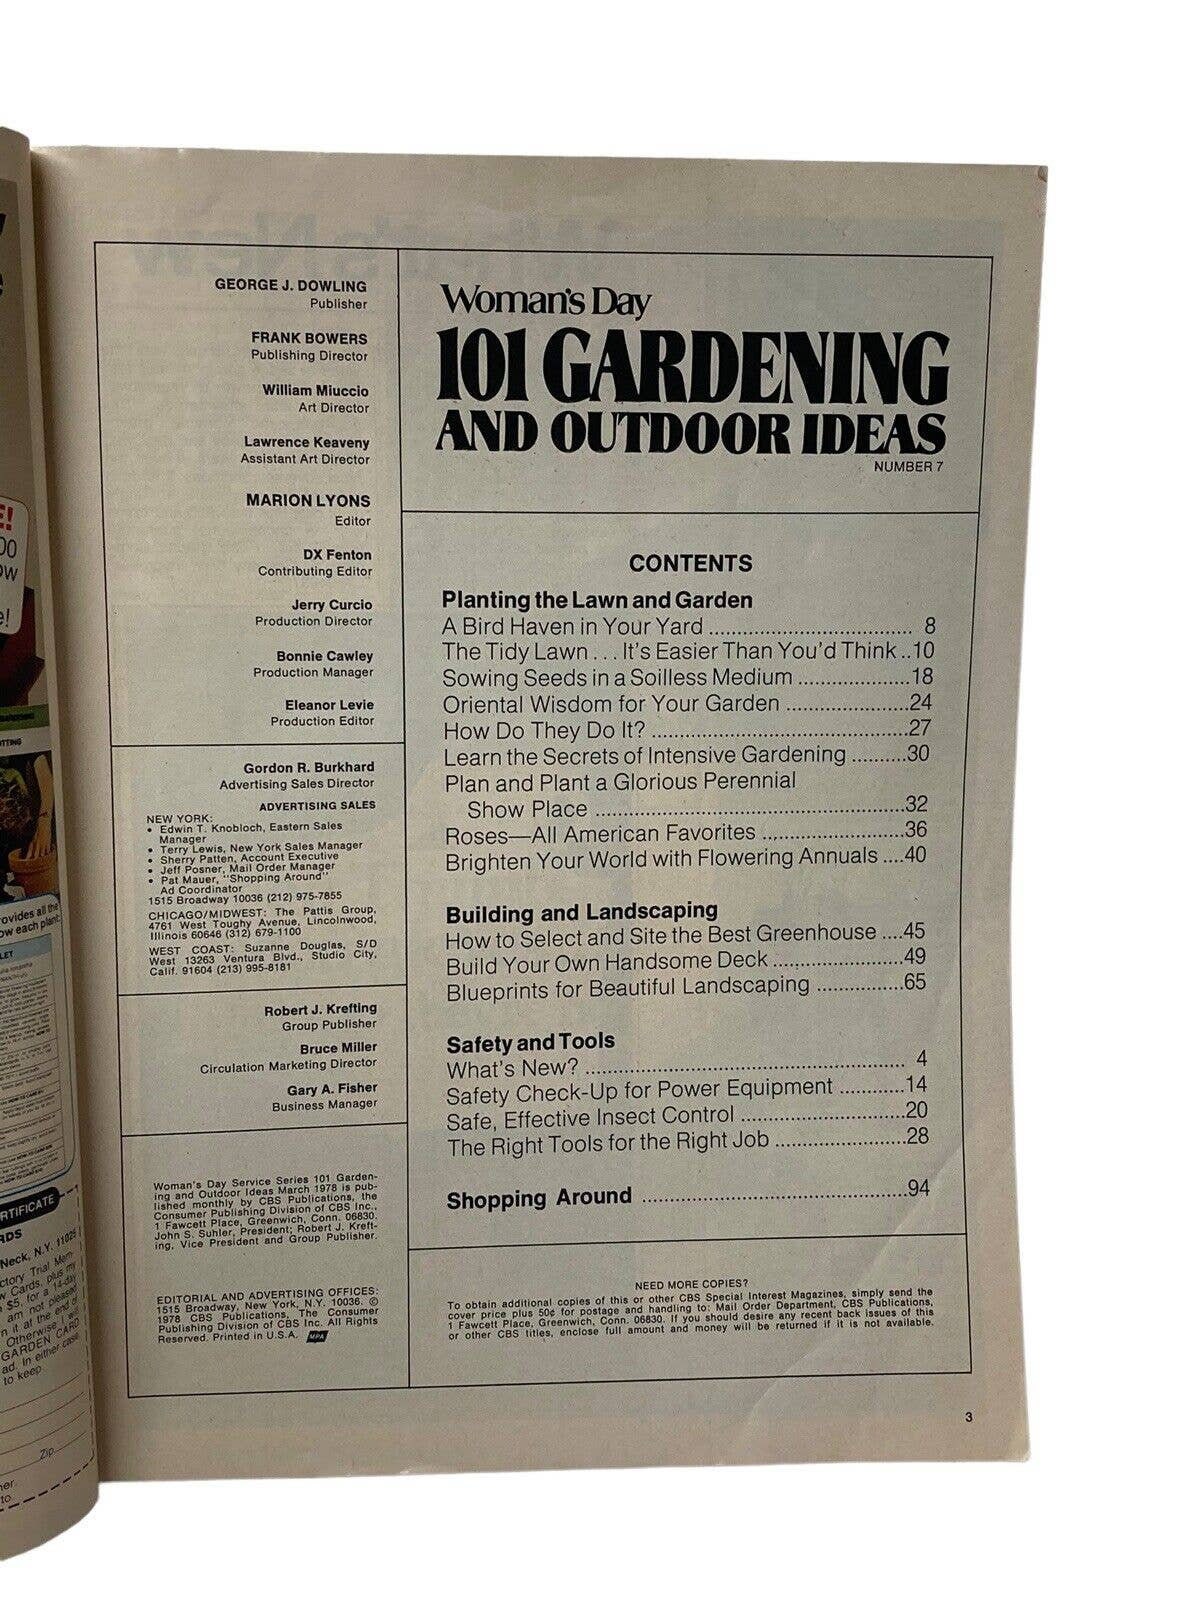 Womans Day 101 Gardening And Outdoor Ideas Magazine 1973 Vintage Issue Outdoor Ideas Magazine 1973 Vintage Issue 7